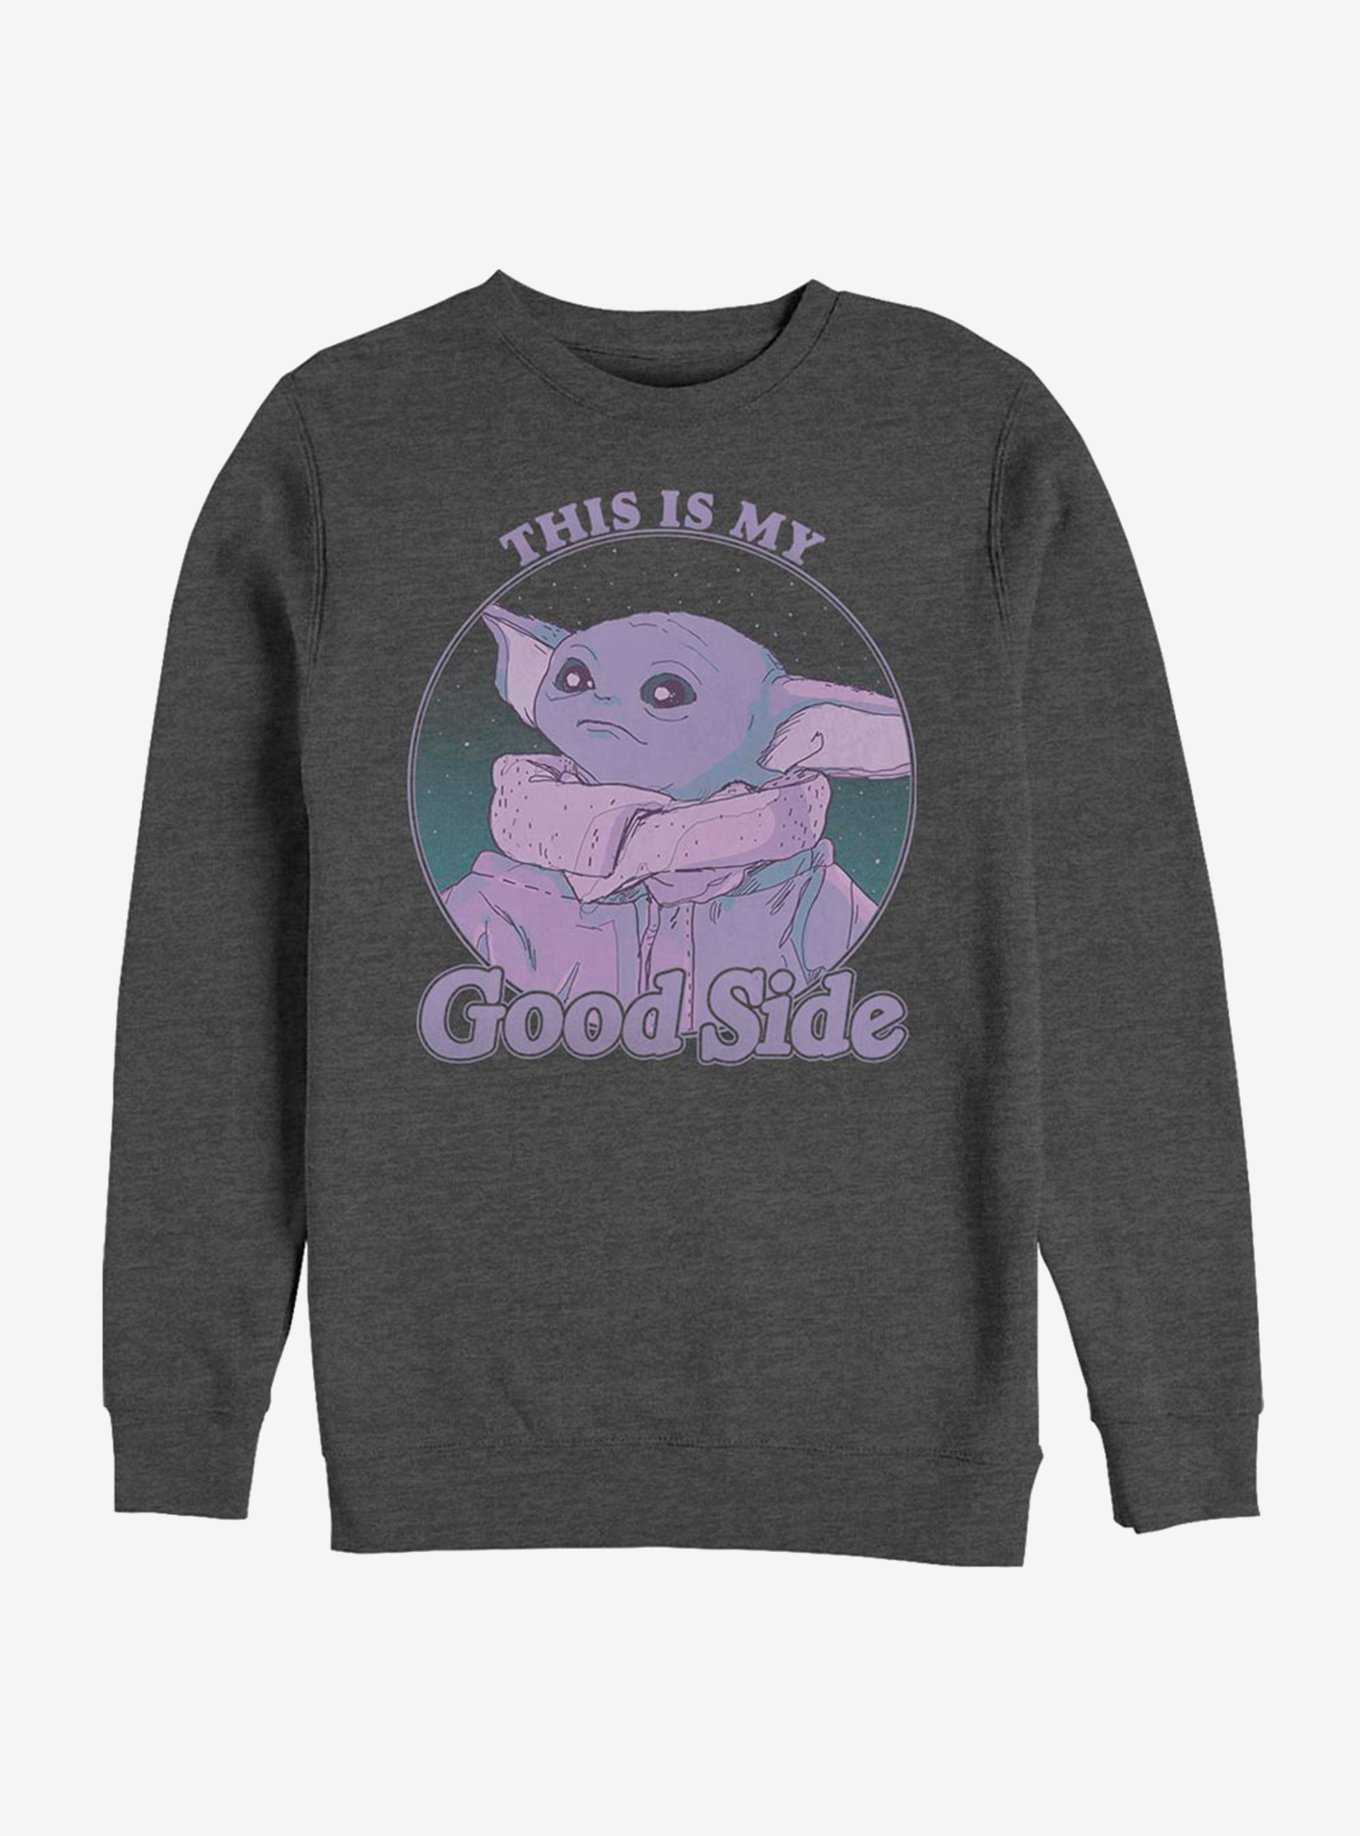 Star Wars The Mandalorian The Child This Is My Good Side Crew Sweatshirt, , hi-res